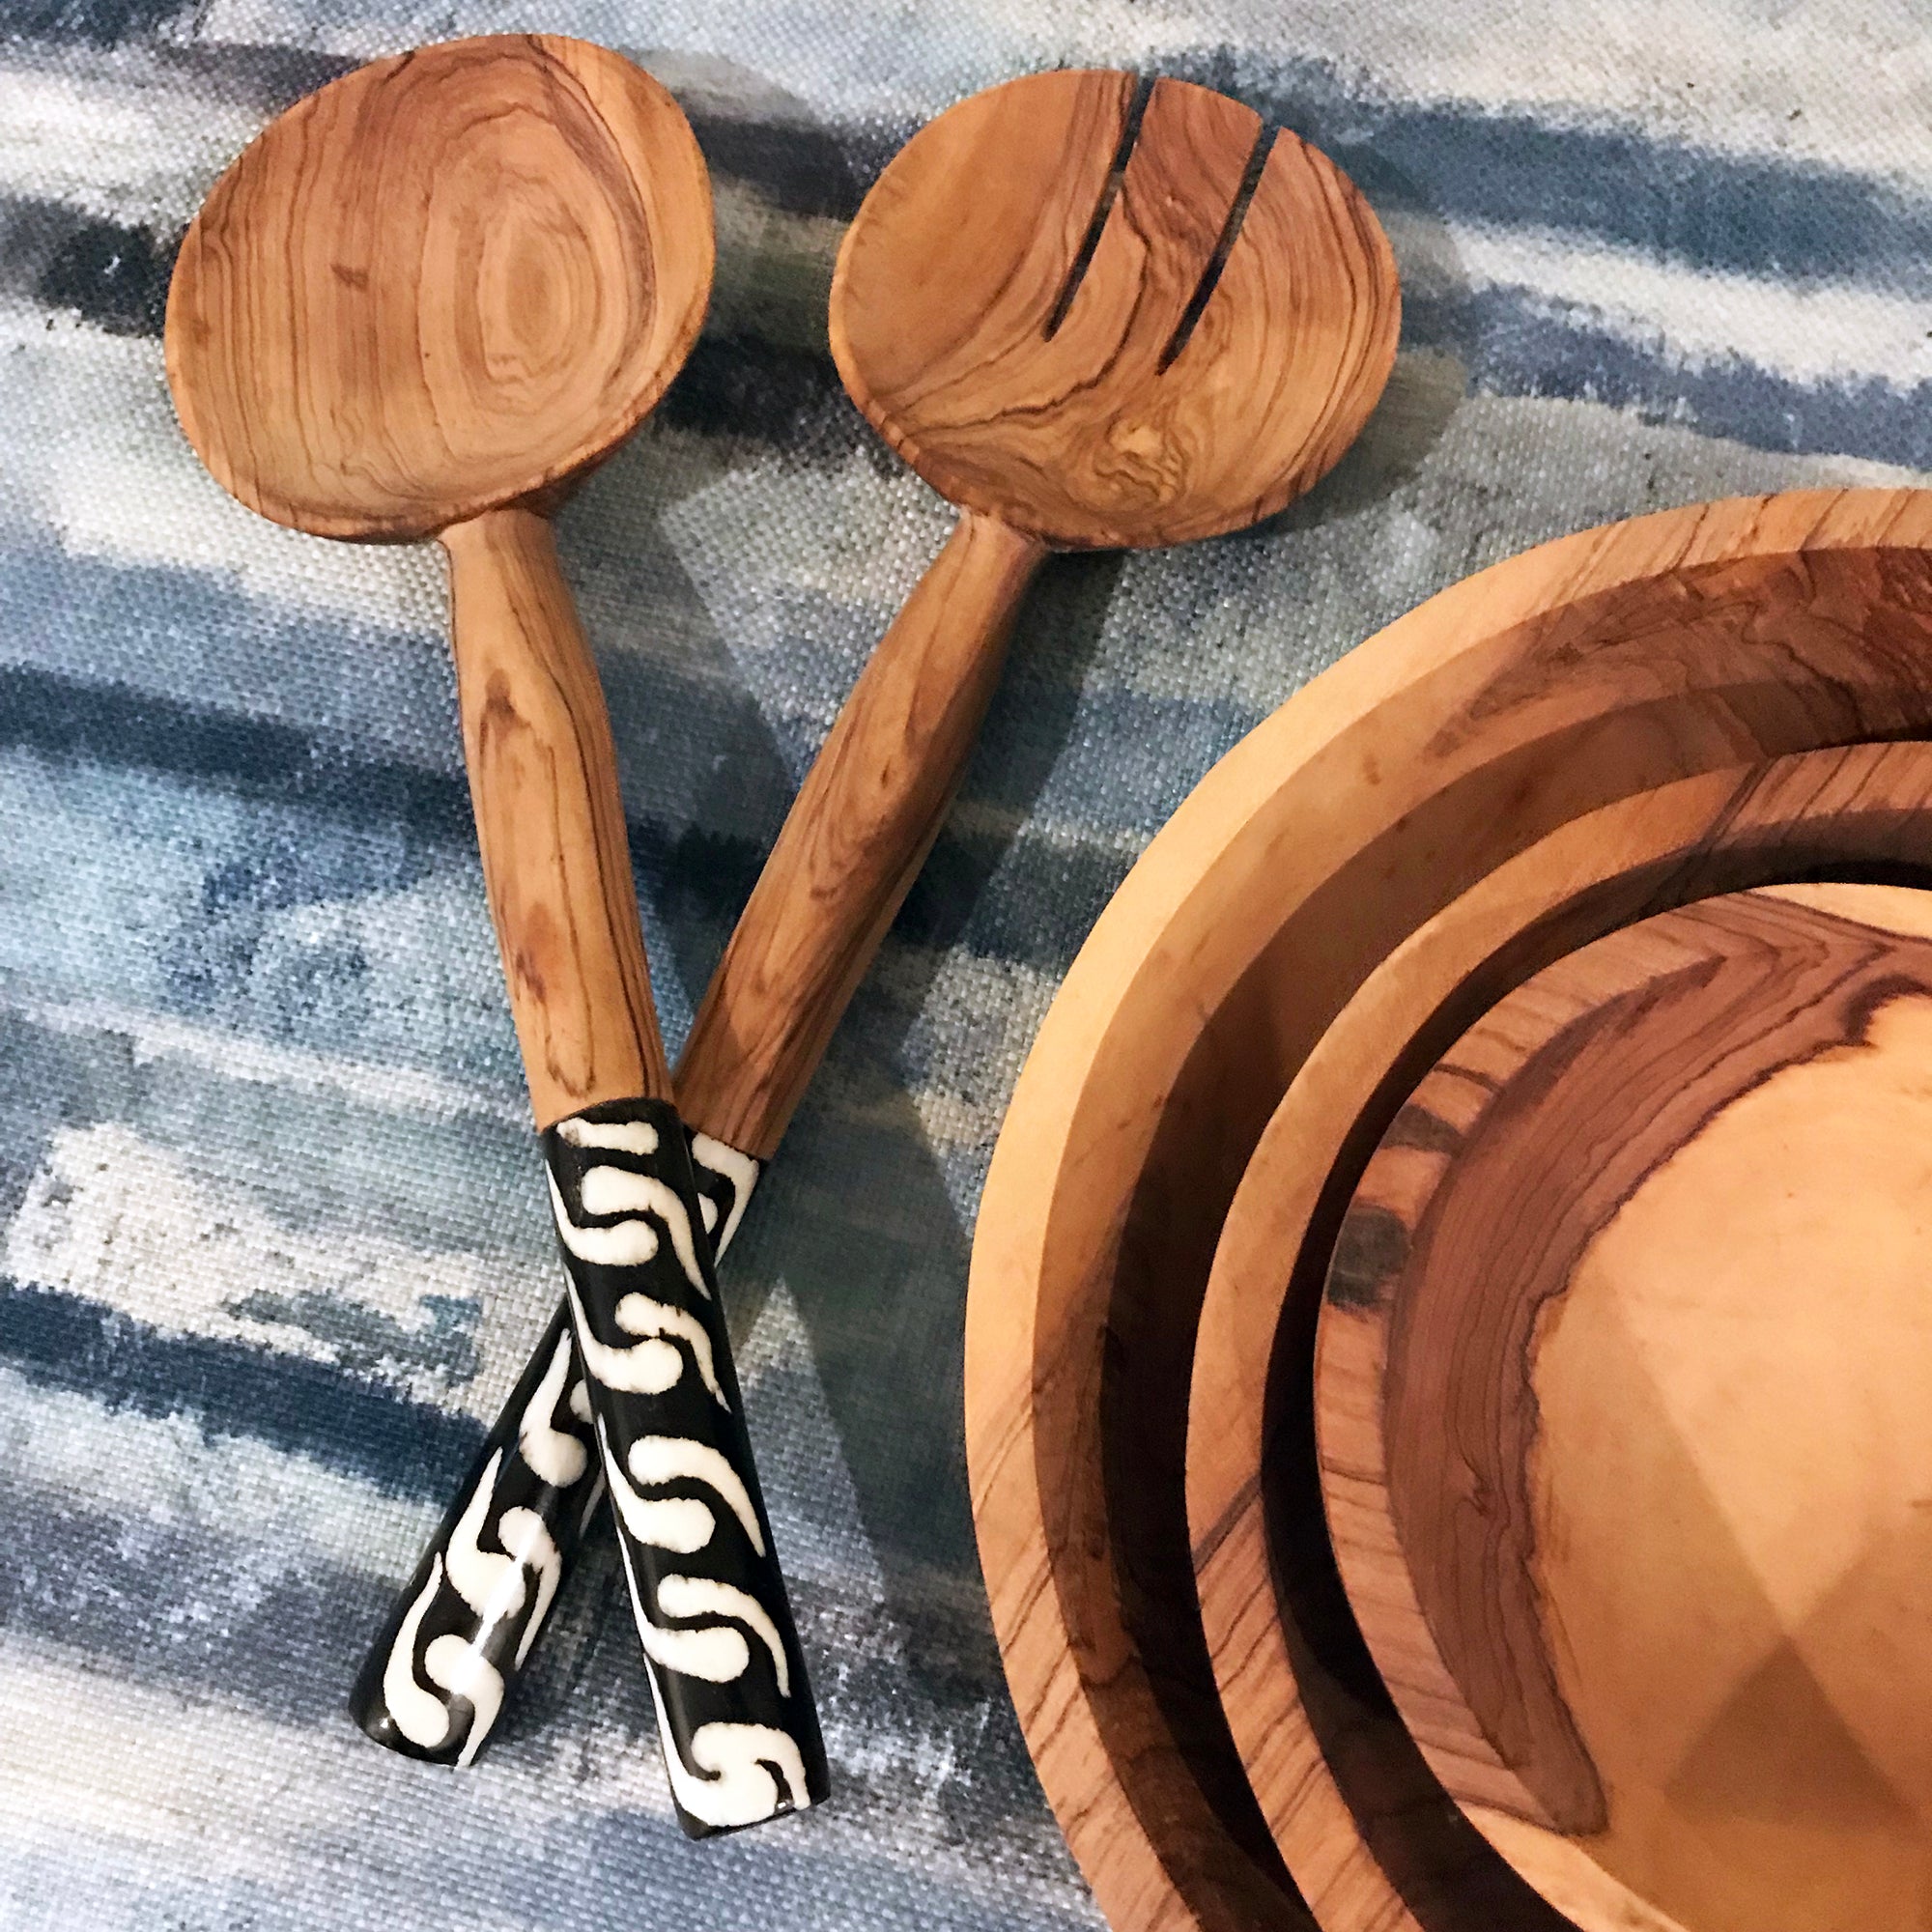 Hand Carved Wood Serving Set and Bowls from Kenya